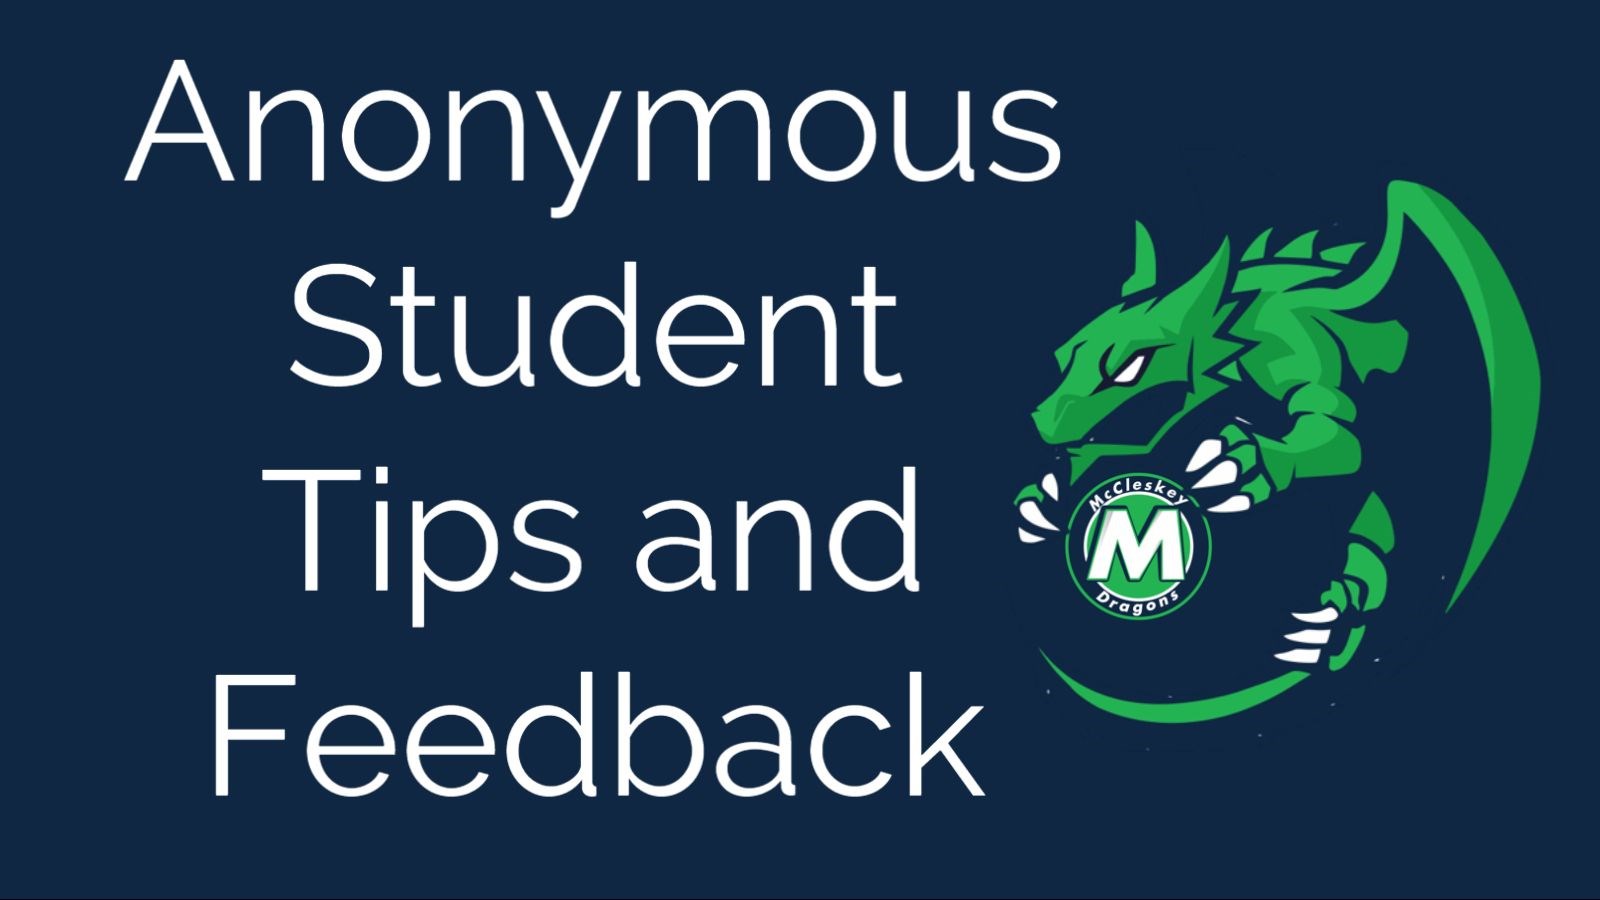 Student Tips and Feedback